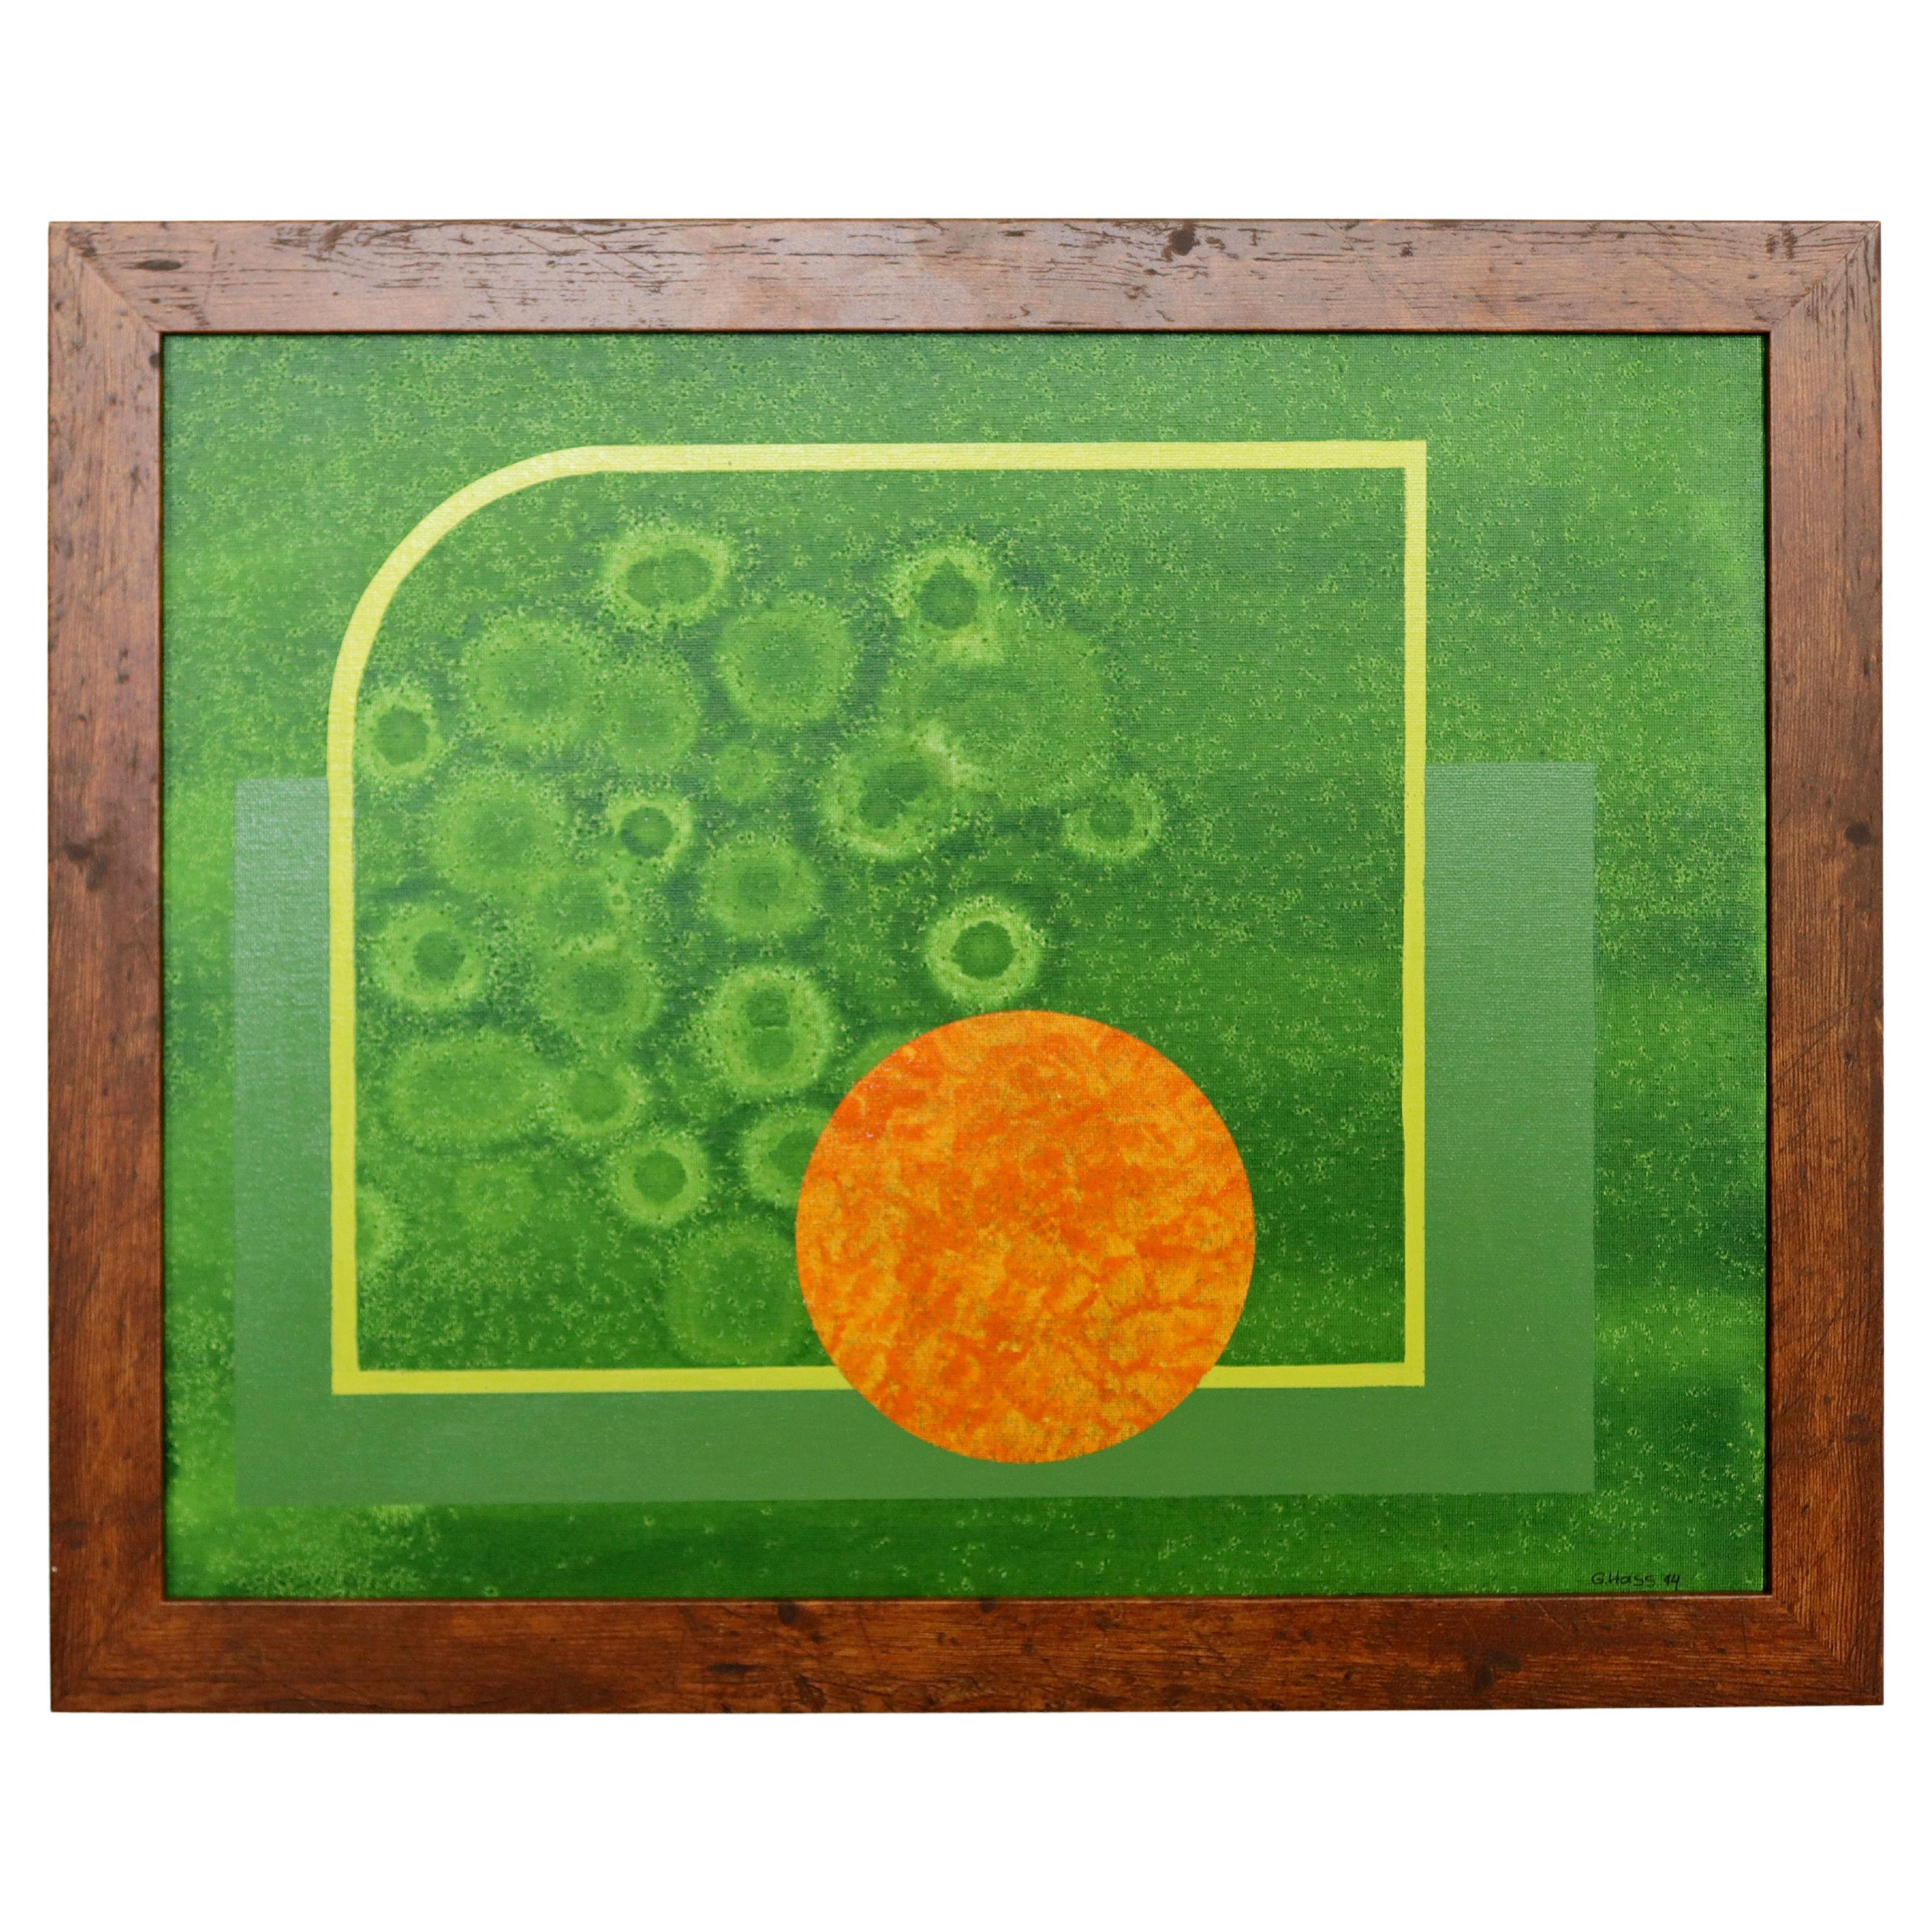 Contemporary Modernist Framed Gunda Hass Signed Acrylic Painting Green Orange For Sale